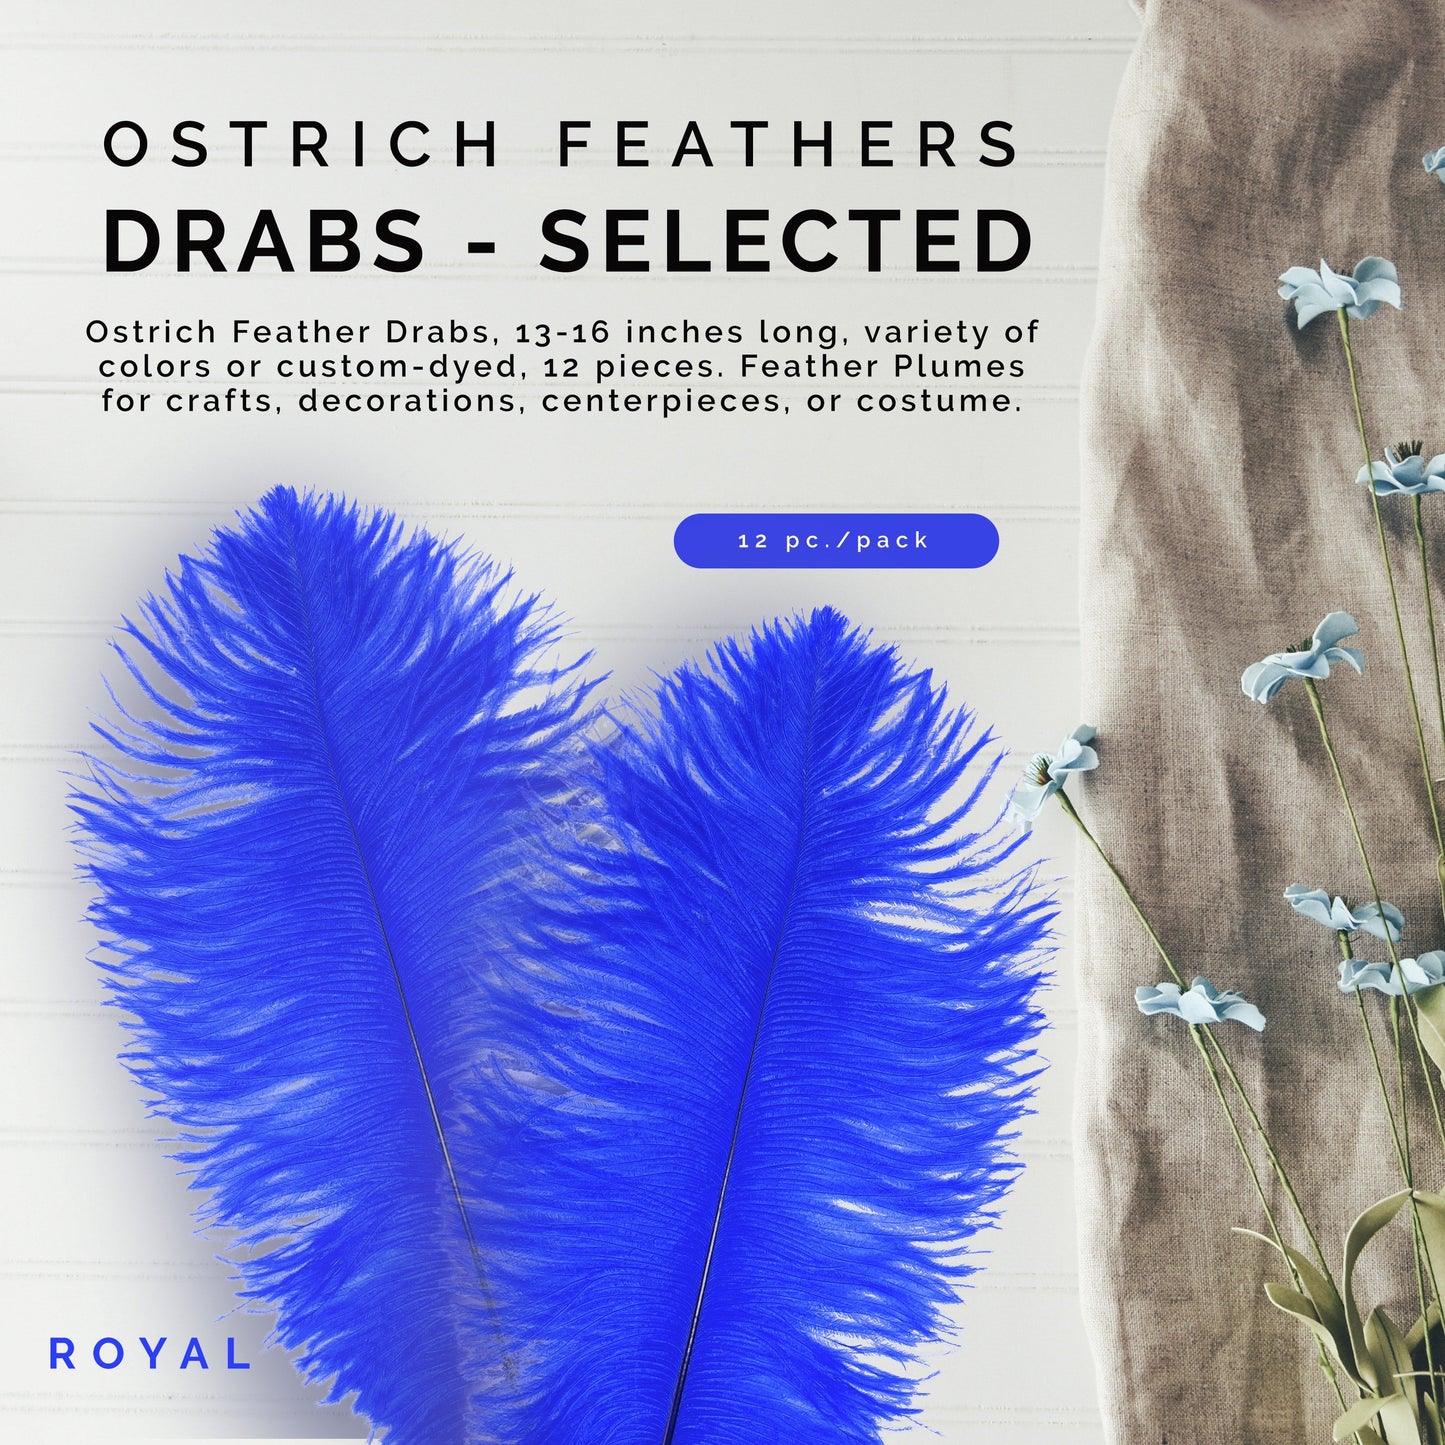 Ostrich Feathers 13-16" Drabs - Royal